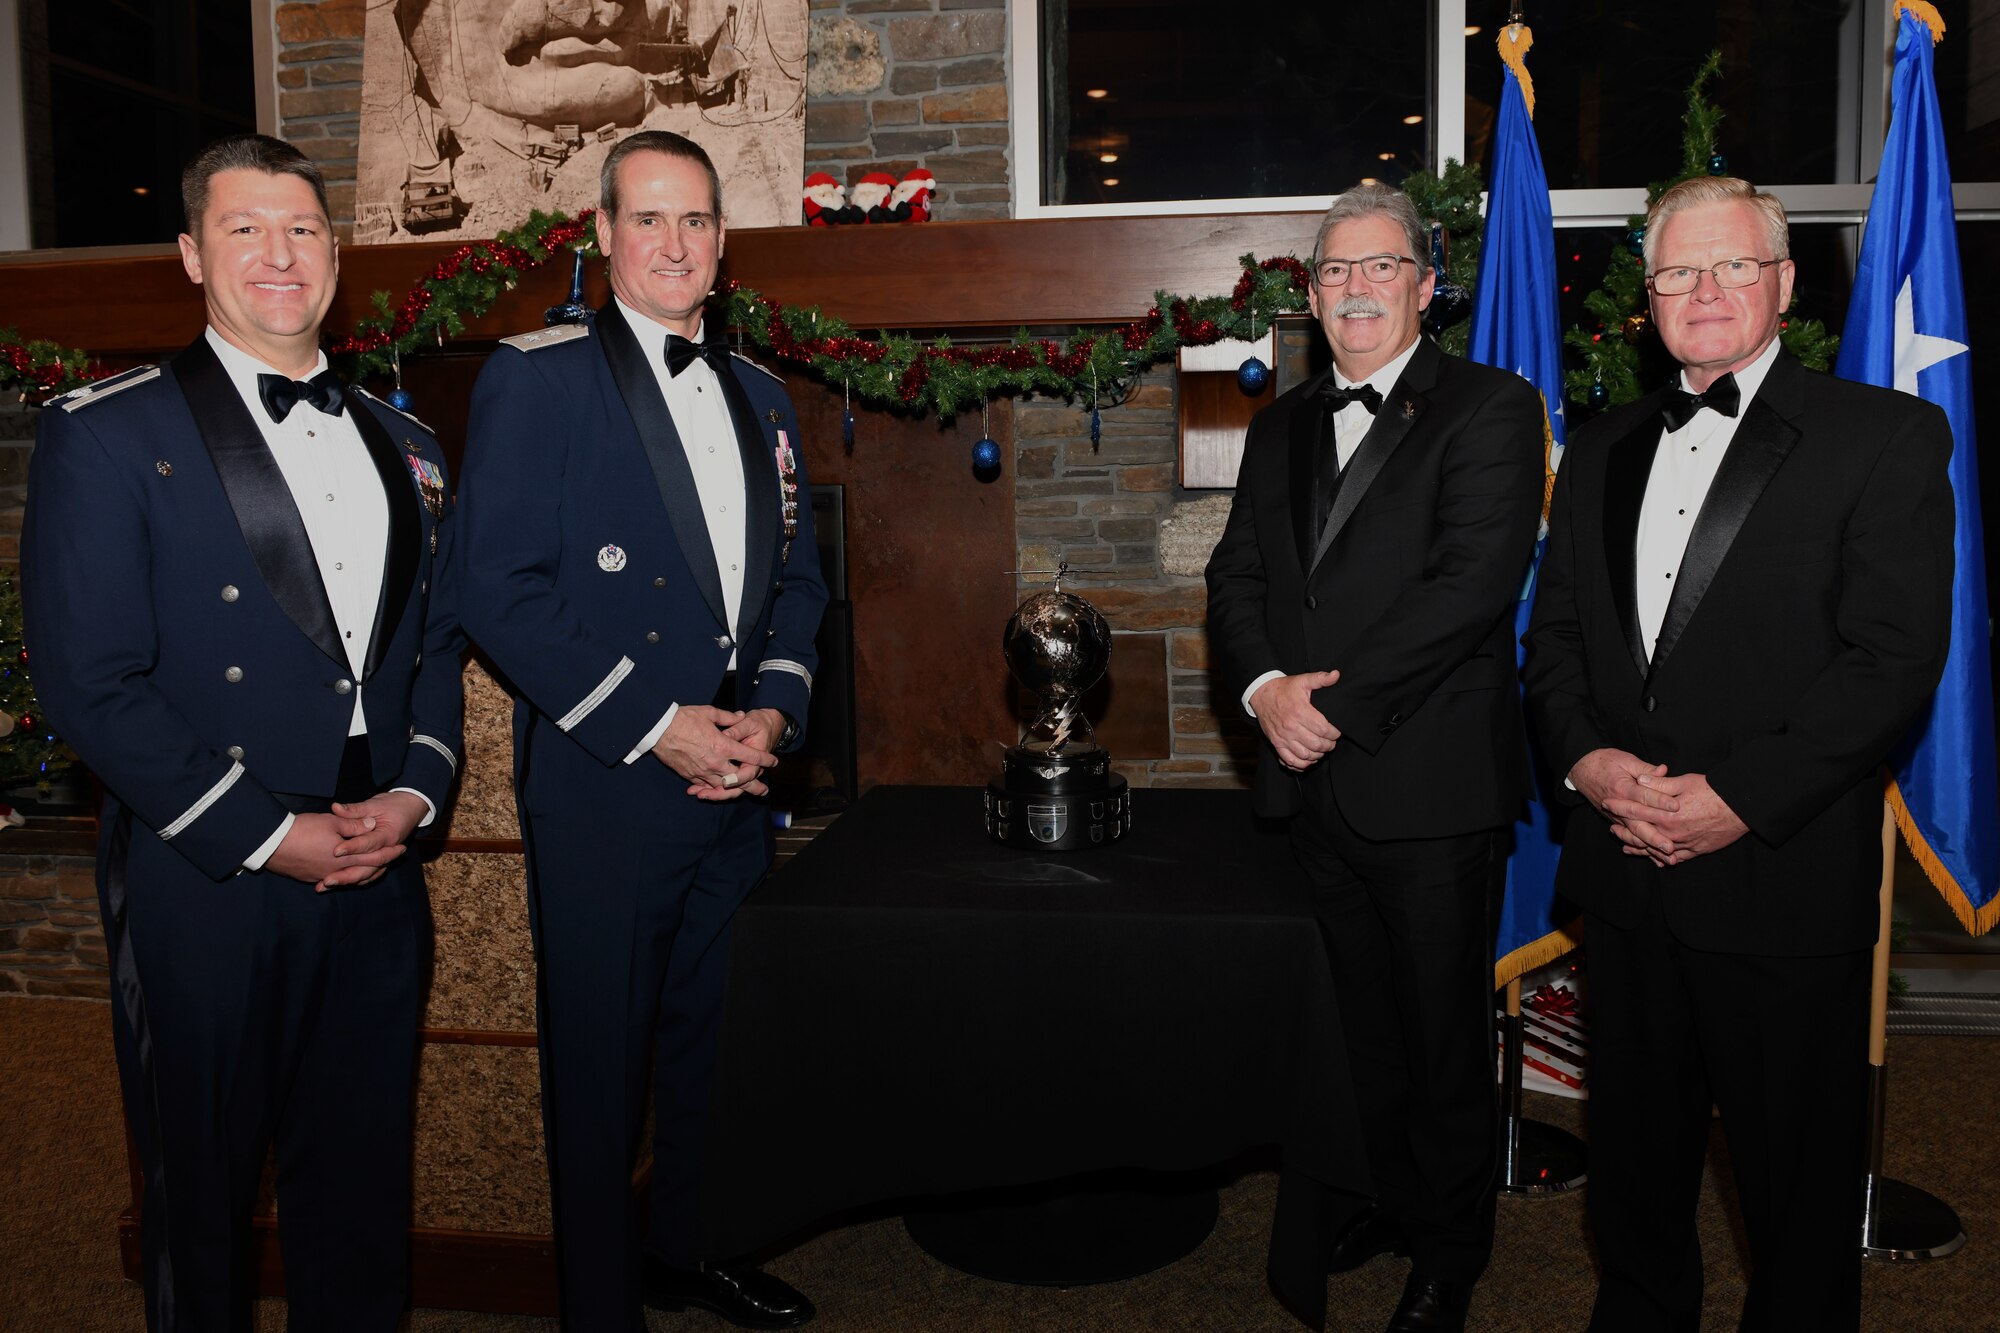 Lt. Col. Michael, Maj. Gen. Peter Gersten, David Alexander, and Larry Stutzriem stand together during the General Atomics’ MQ-1B/9 Squadron of the Year awards presentation at Mount Rushmore in Keystone, S.D., Dec. 7, 2018. The 89th Attack Squadron, a tenant unit at Ellsworth Air Force Base, won this year’s award. Michael is the 89th ATKS commander; Gersten is the U.S. Air Force Warfare Center commander; Alexander is the General Atomics Aeronautical Systems Inc. aircraft systems business unit president; and Stutzriem is the Mitchell Institute for Aerospace studies director of research. (U.S. Air Force photo by Senior Airman Denise Jenson)